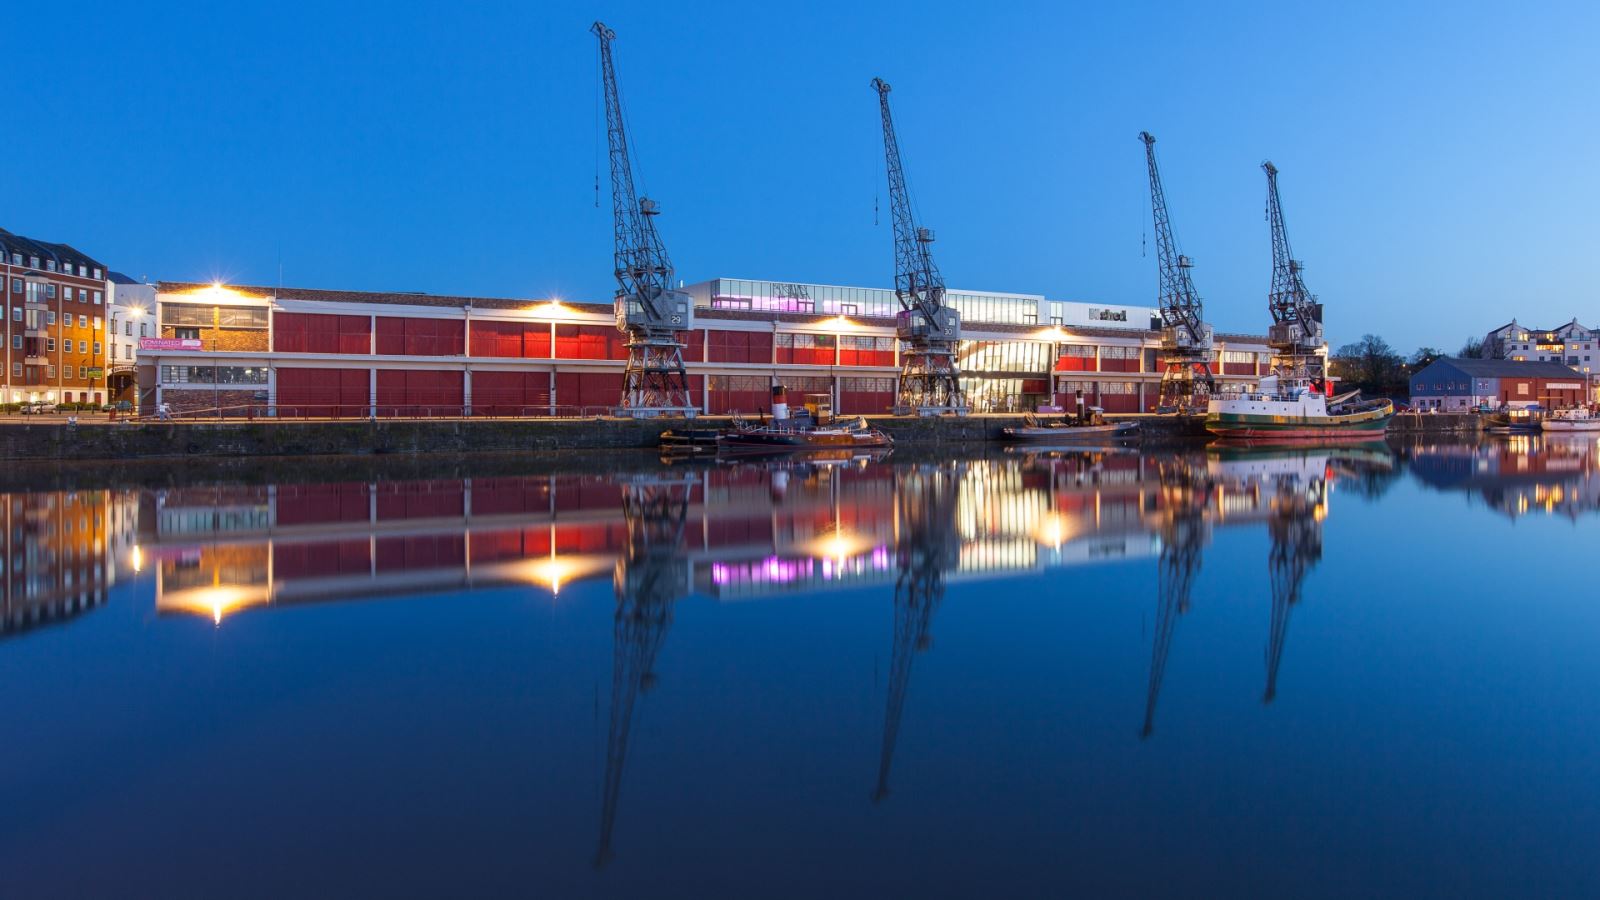 A view of M Shed museum in Bristol from across the Harbour